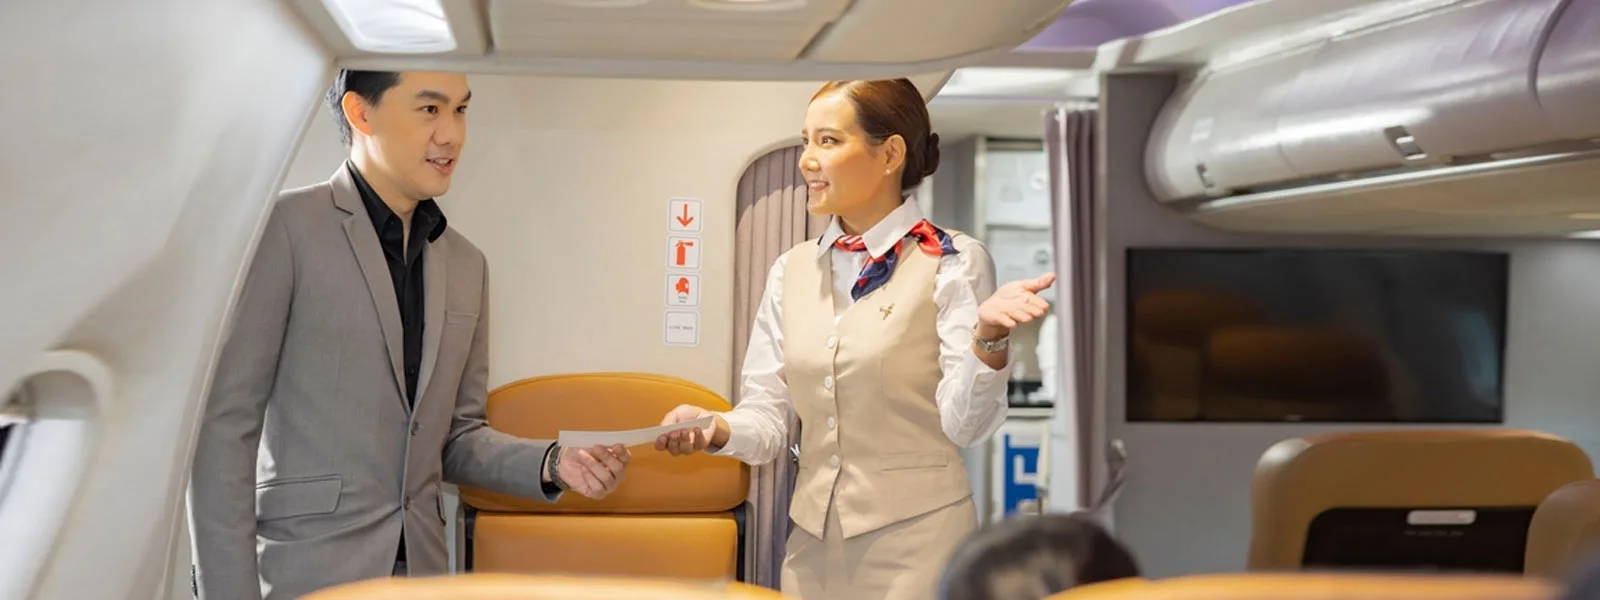 excellent customer service in airline industry